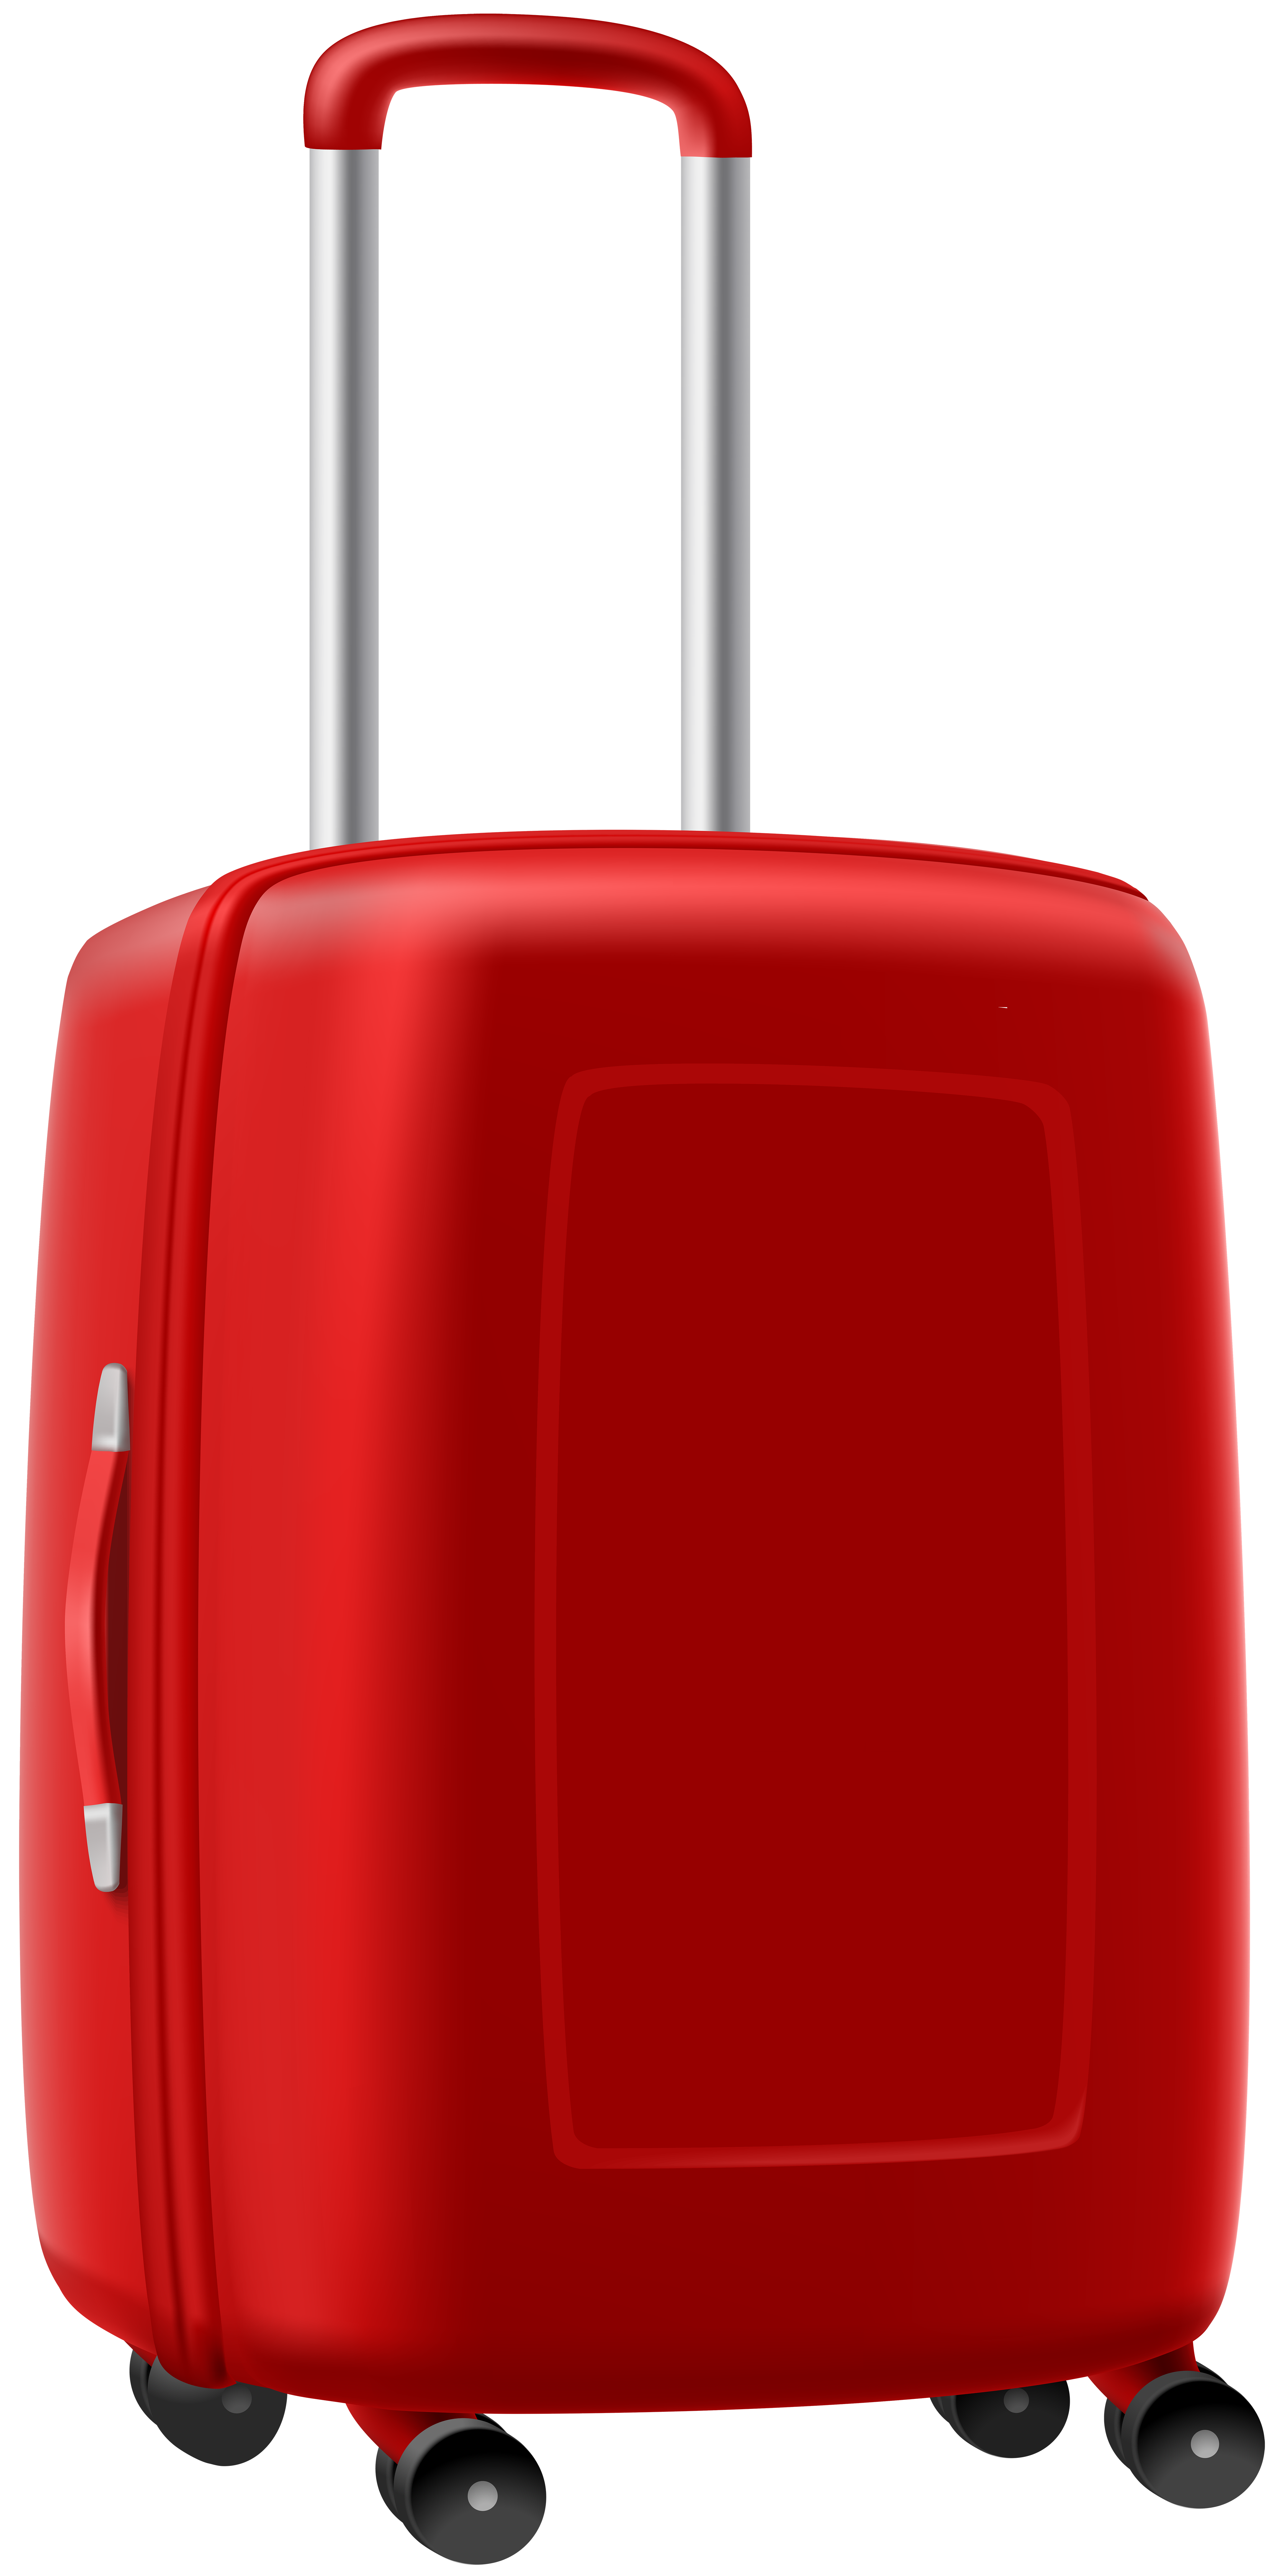 Luggage clipart trolly bag. Suitcase baggage royalty free